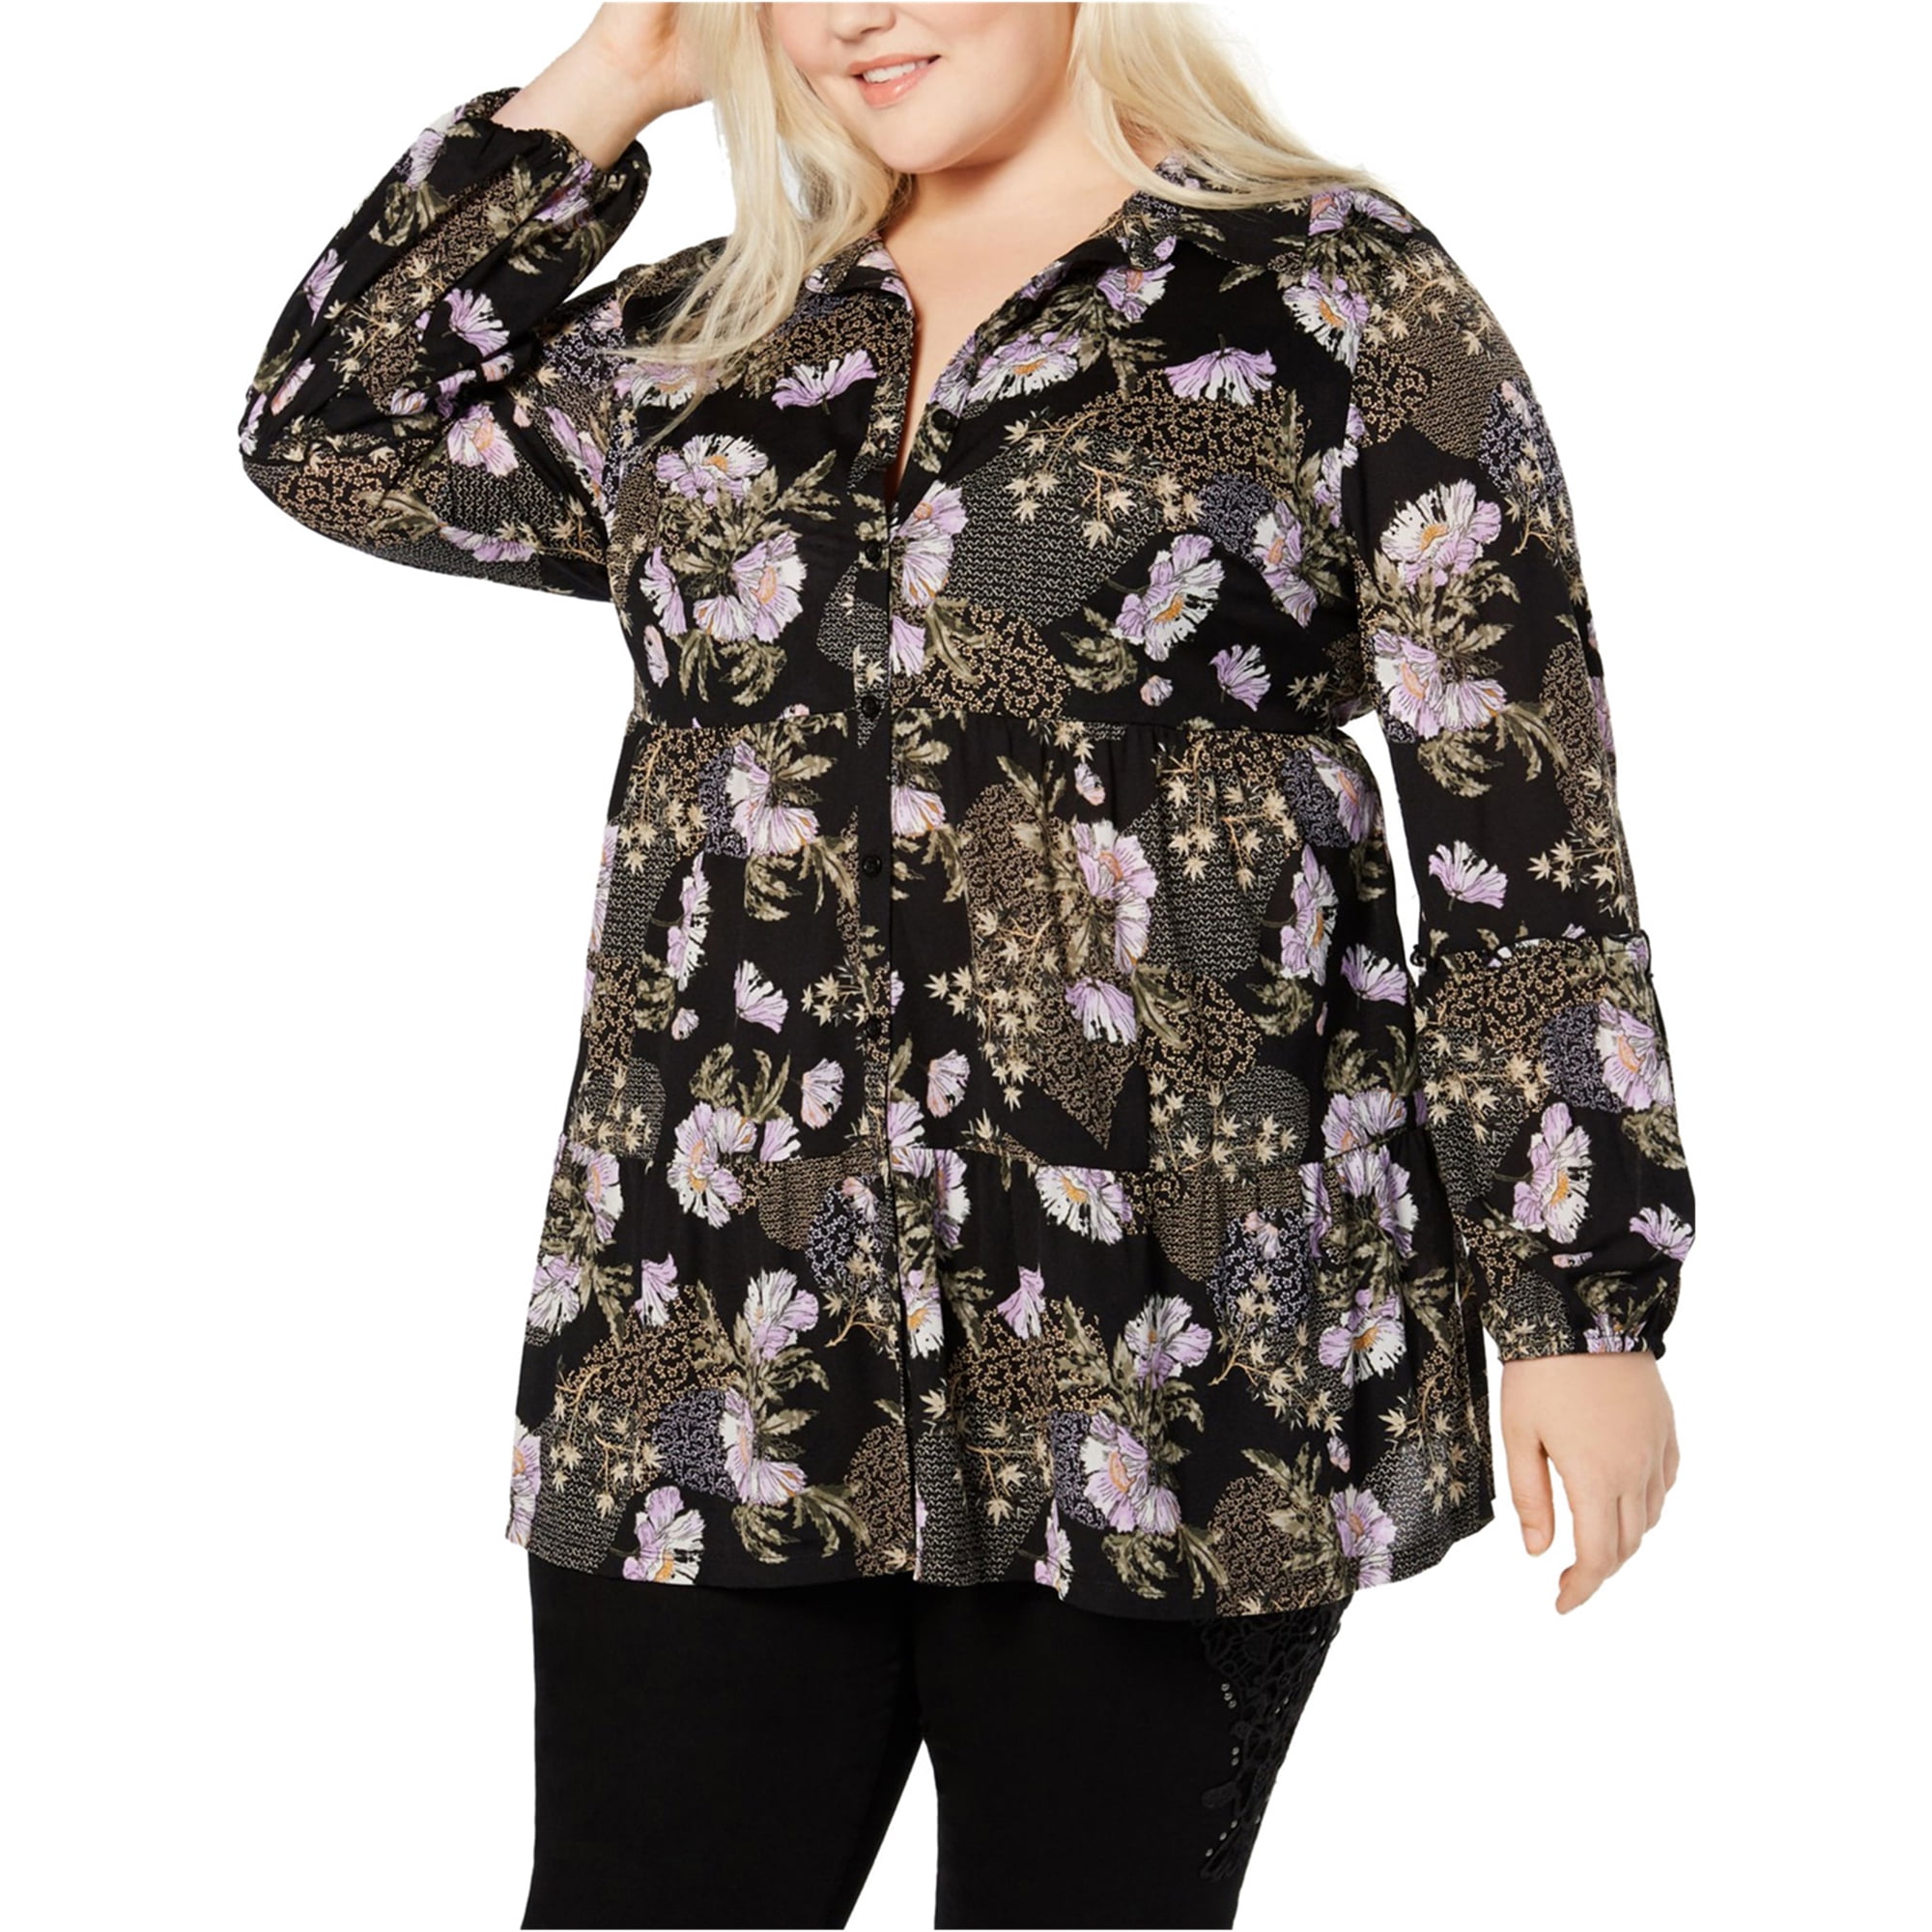 Womens Plus Floral Tiered Peasant Top Style & Co